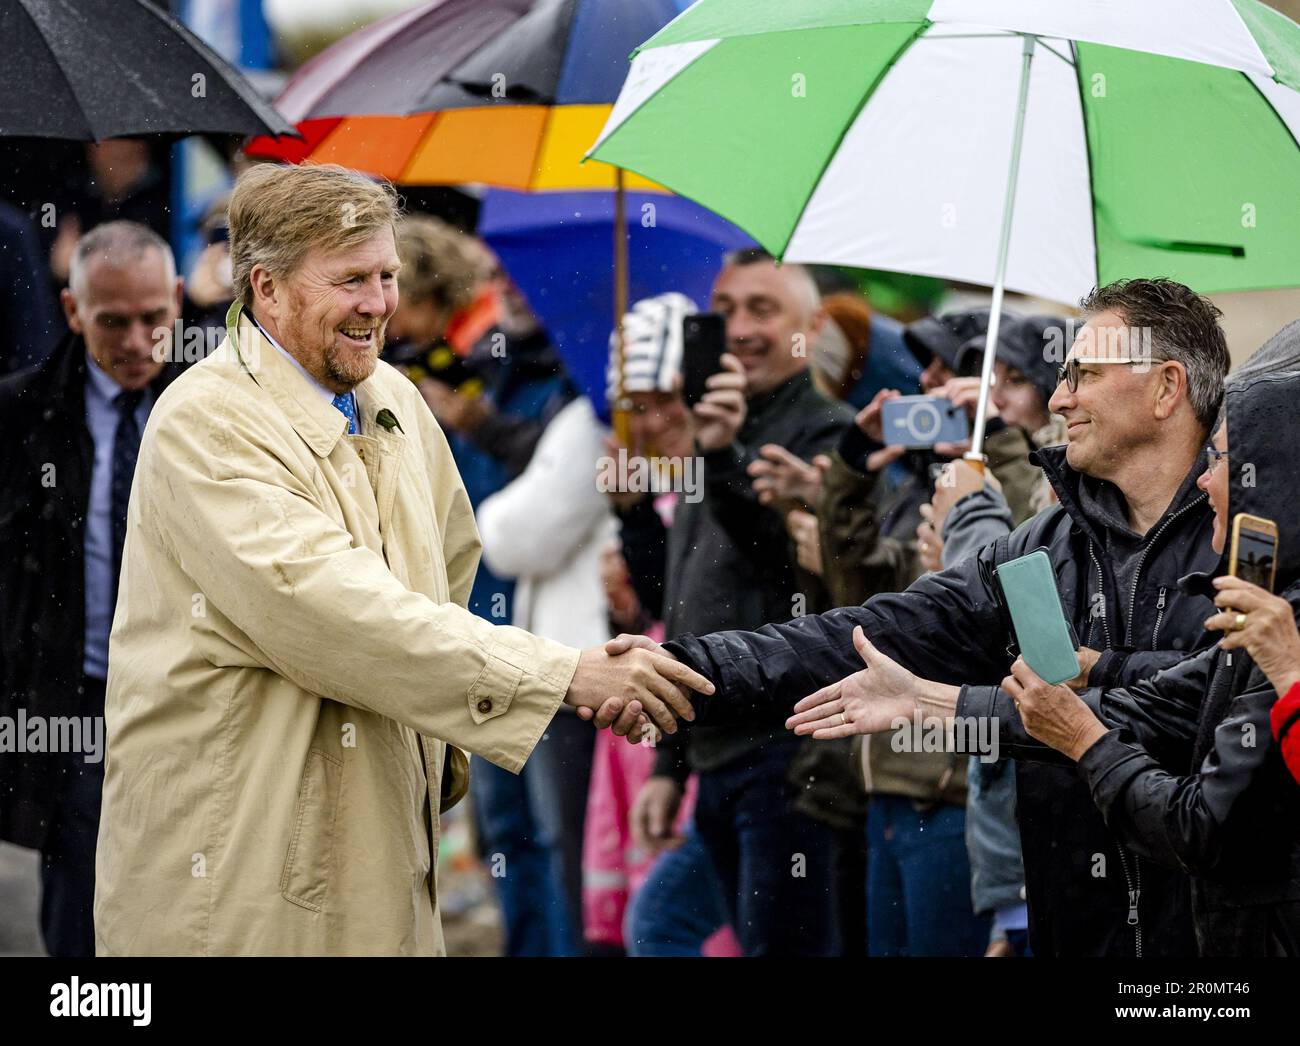 DEN HOORN - King Willem-Alexander arrives at Beach Pavilion Paal 9. The royal couple is paying a two-day regional visit to the Wadden Islands. ANP SEM VAN DER WAL netherlands out - belgium out Credit: ANP/Alamy Live News Stock Photo